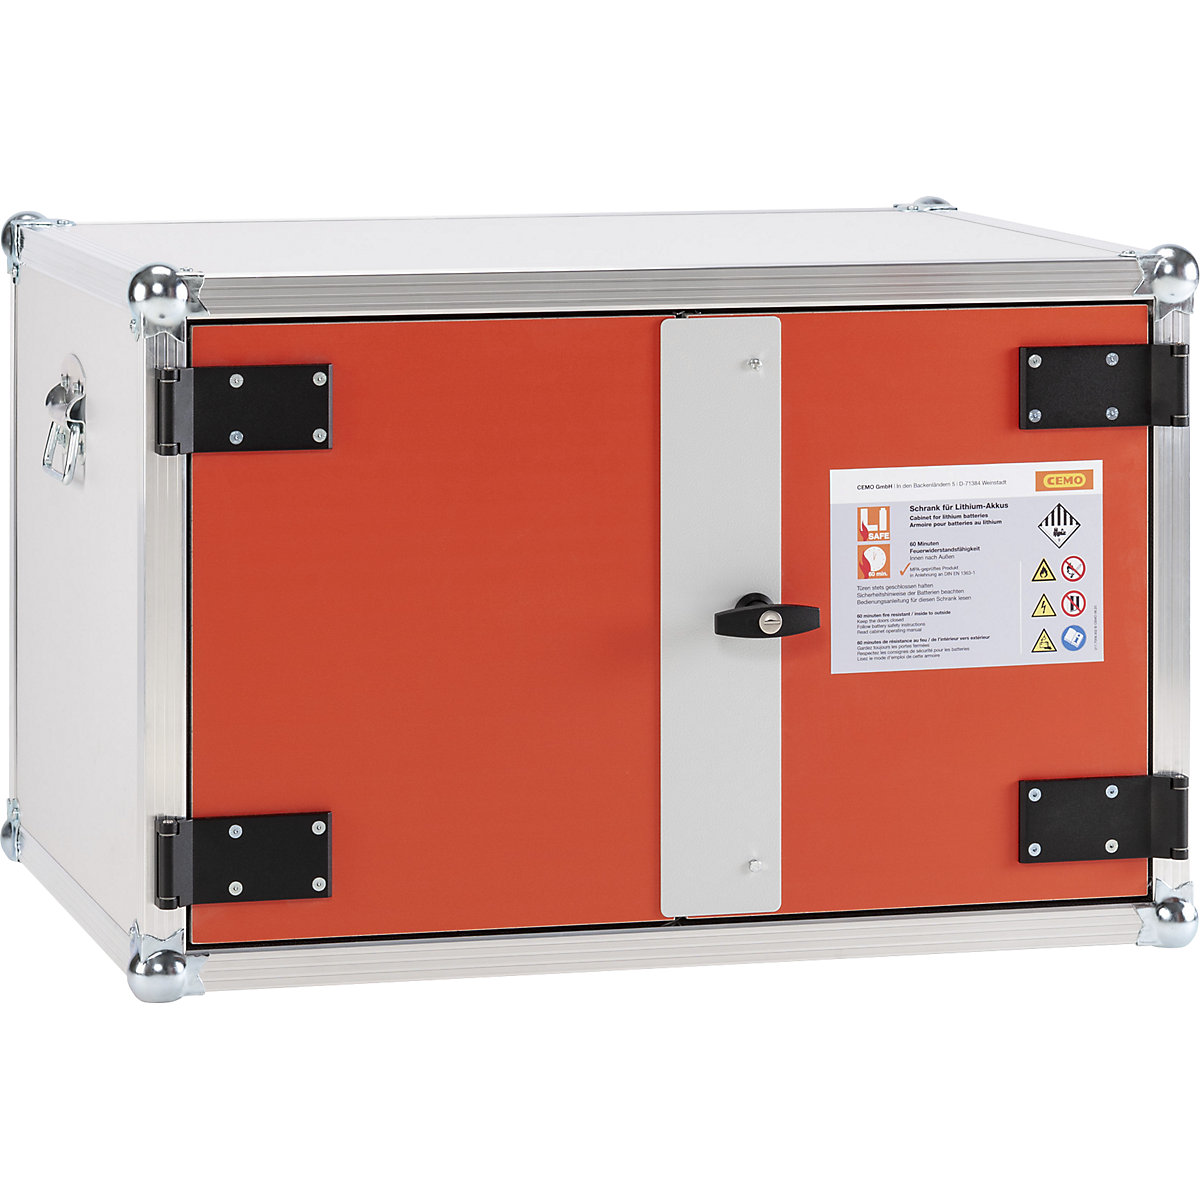 FR 60 safety storage cupboard for rechargeable batteries – CEMO